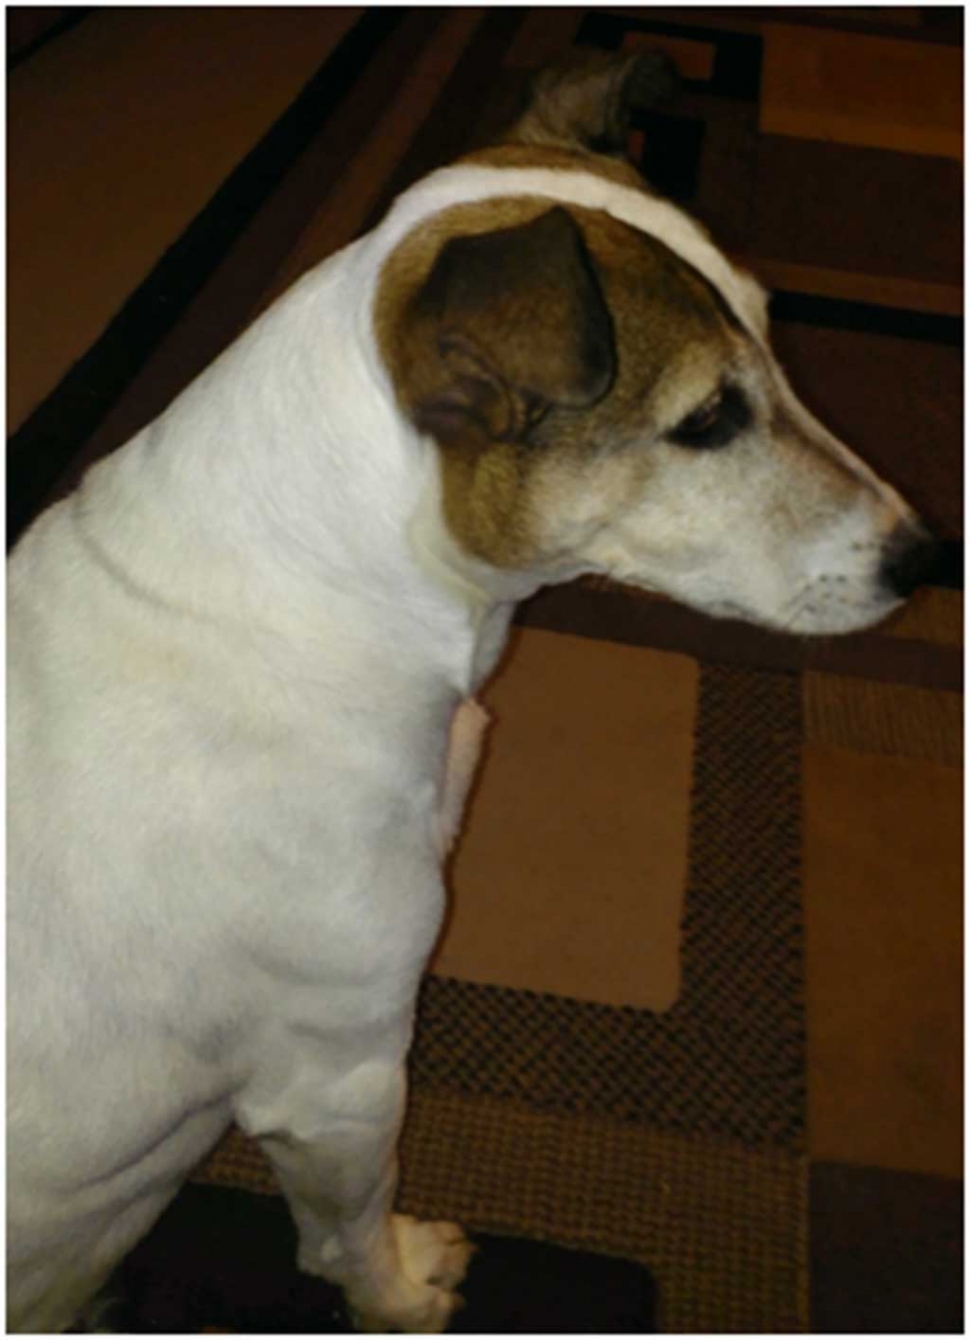 FOUND DOG – Jack Russel Terrier on Thursday 12/17/2015. Contact: Addie @ 805/524-7297 or 805/302-3587